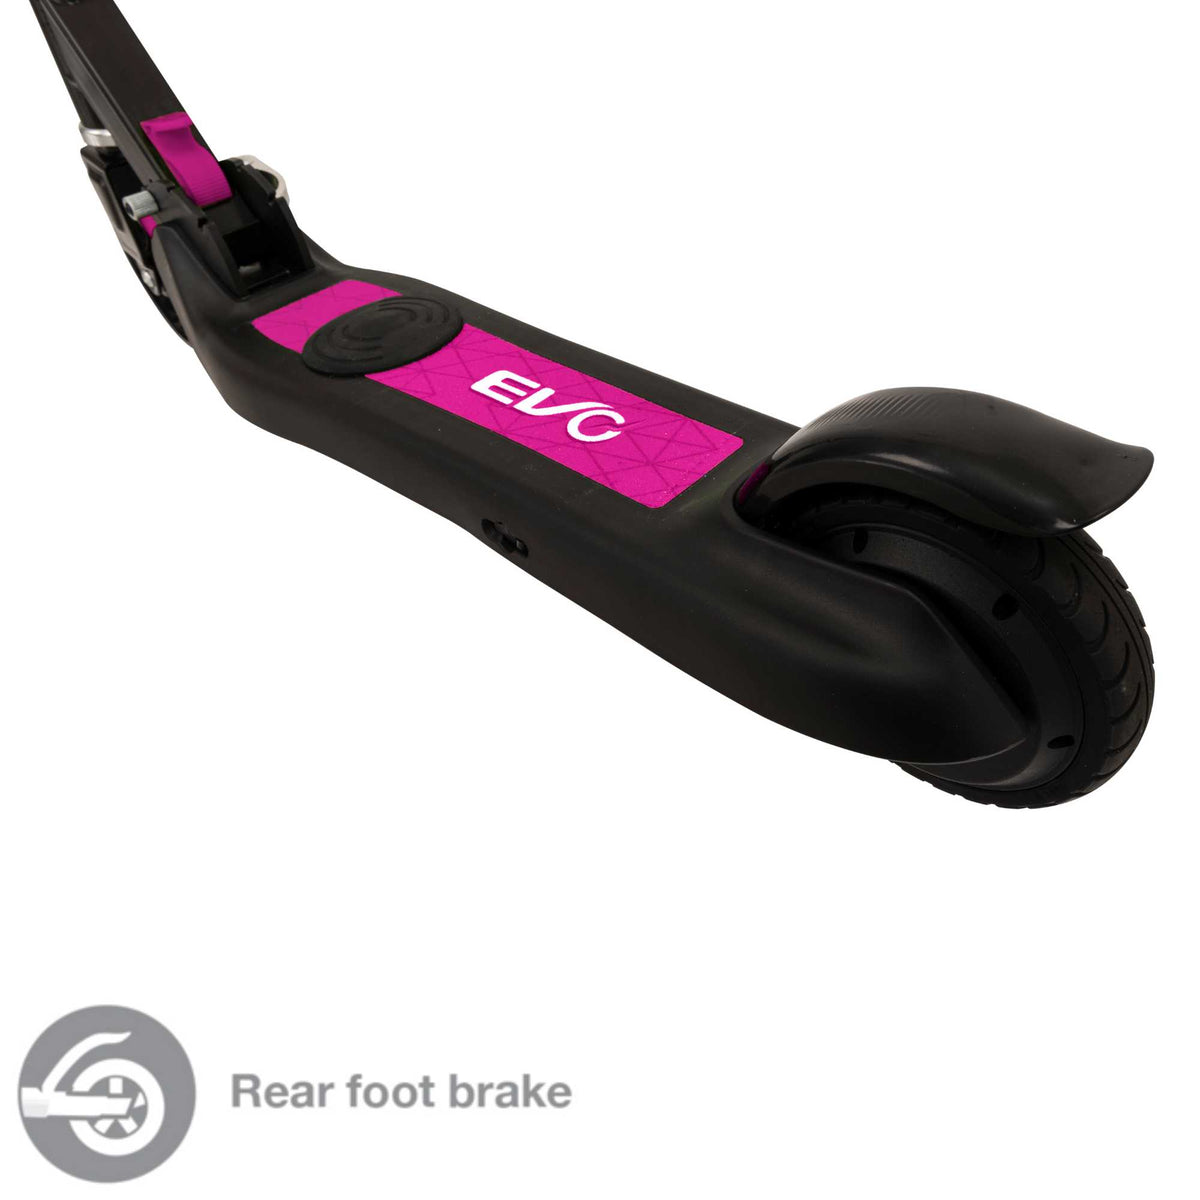 Evo Vt1 Lithium Scooter Pink